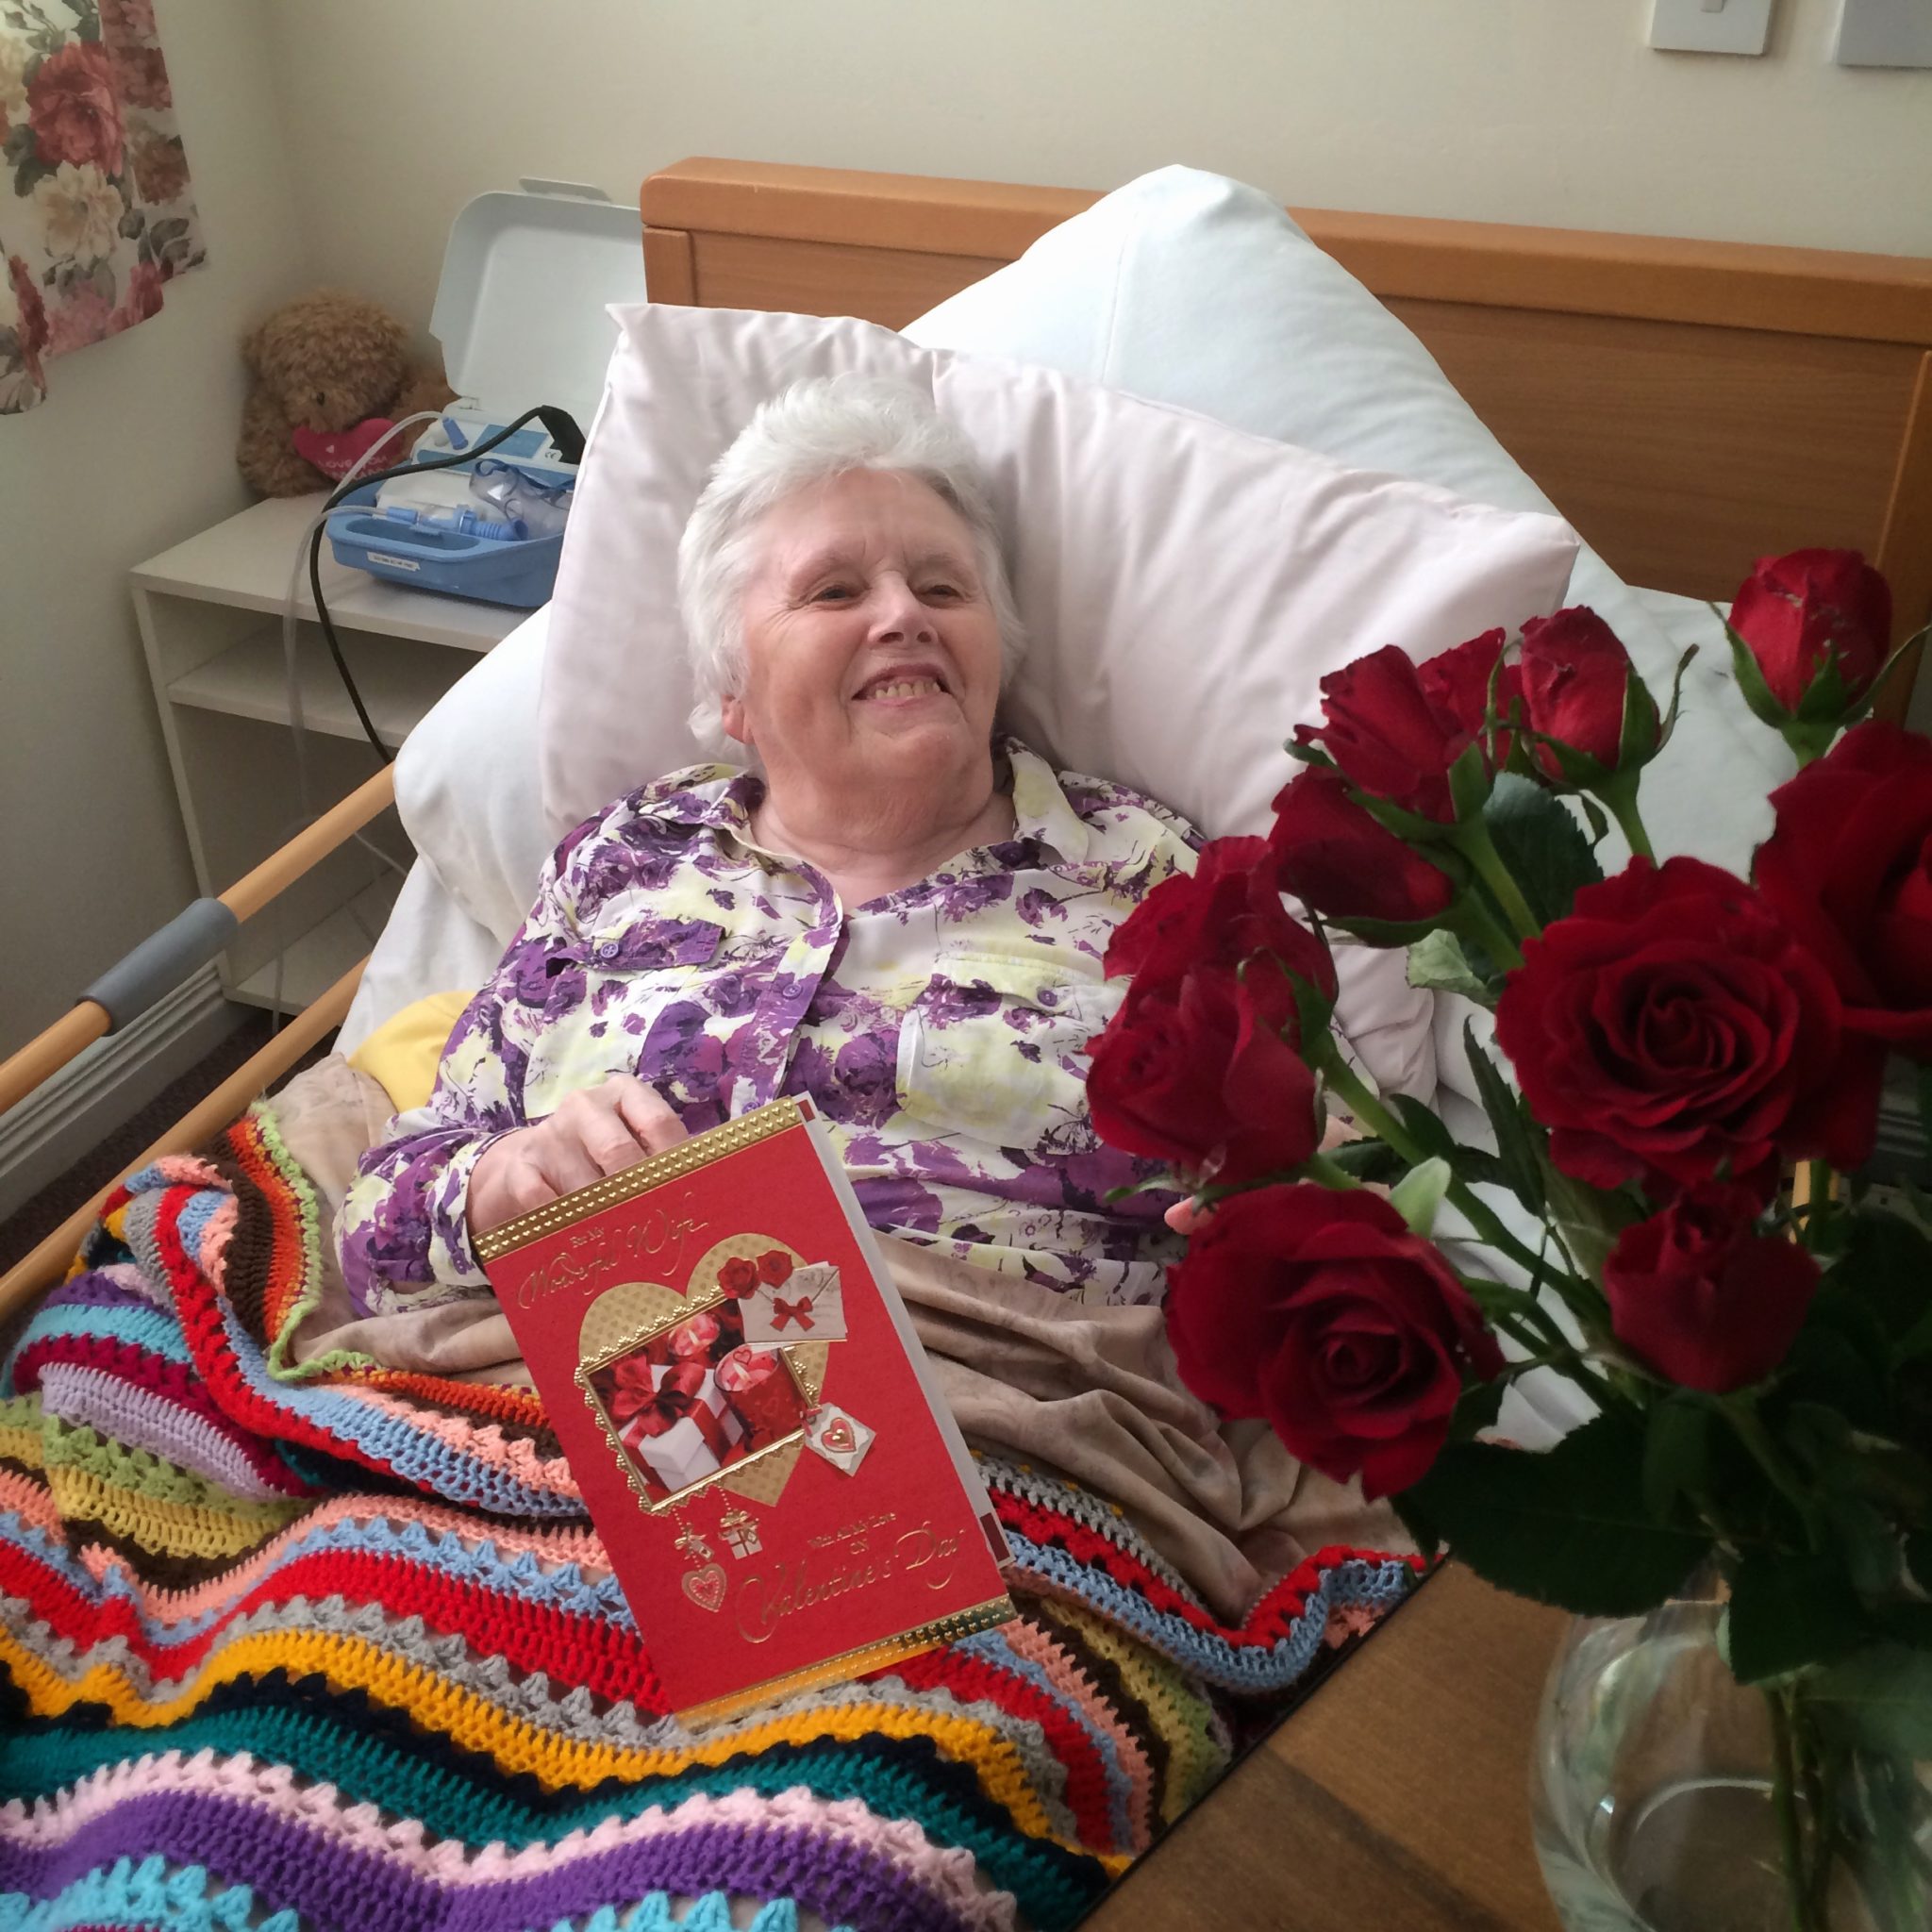 Mum enjoying her Valentine card and roses from Dad